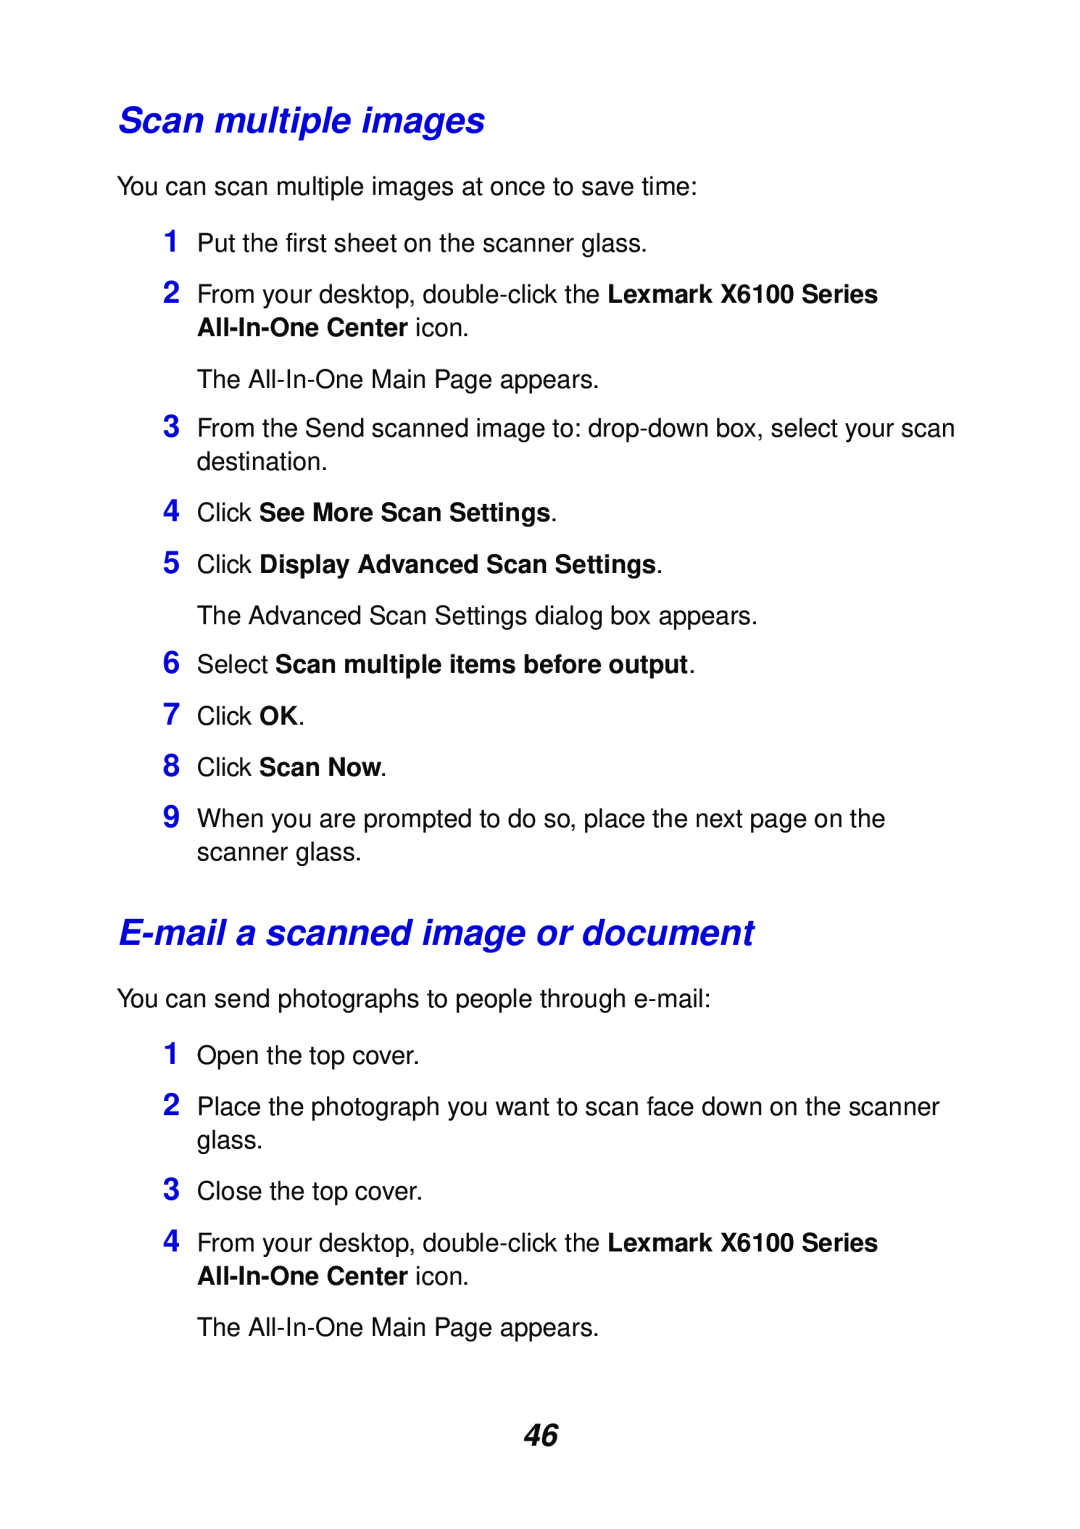 Lexmark X6100 Scan multiple images, E-maila scanned image or document, 4Click See More Scan Settings, 8Click Scan Now 